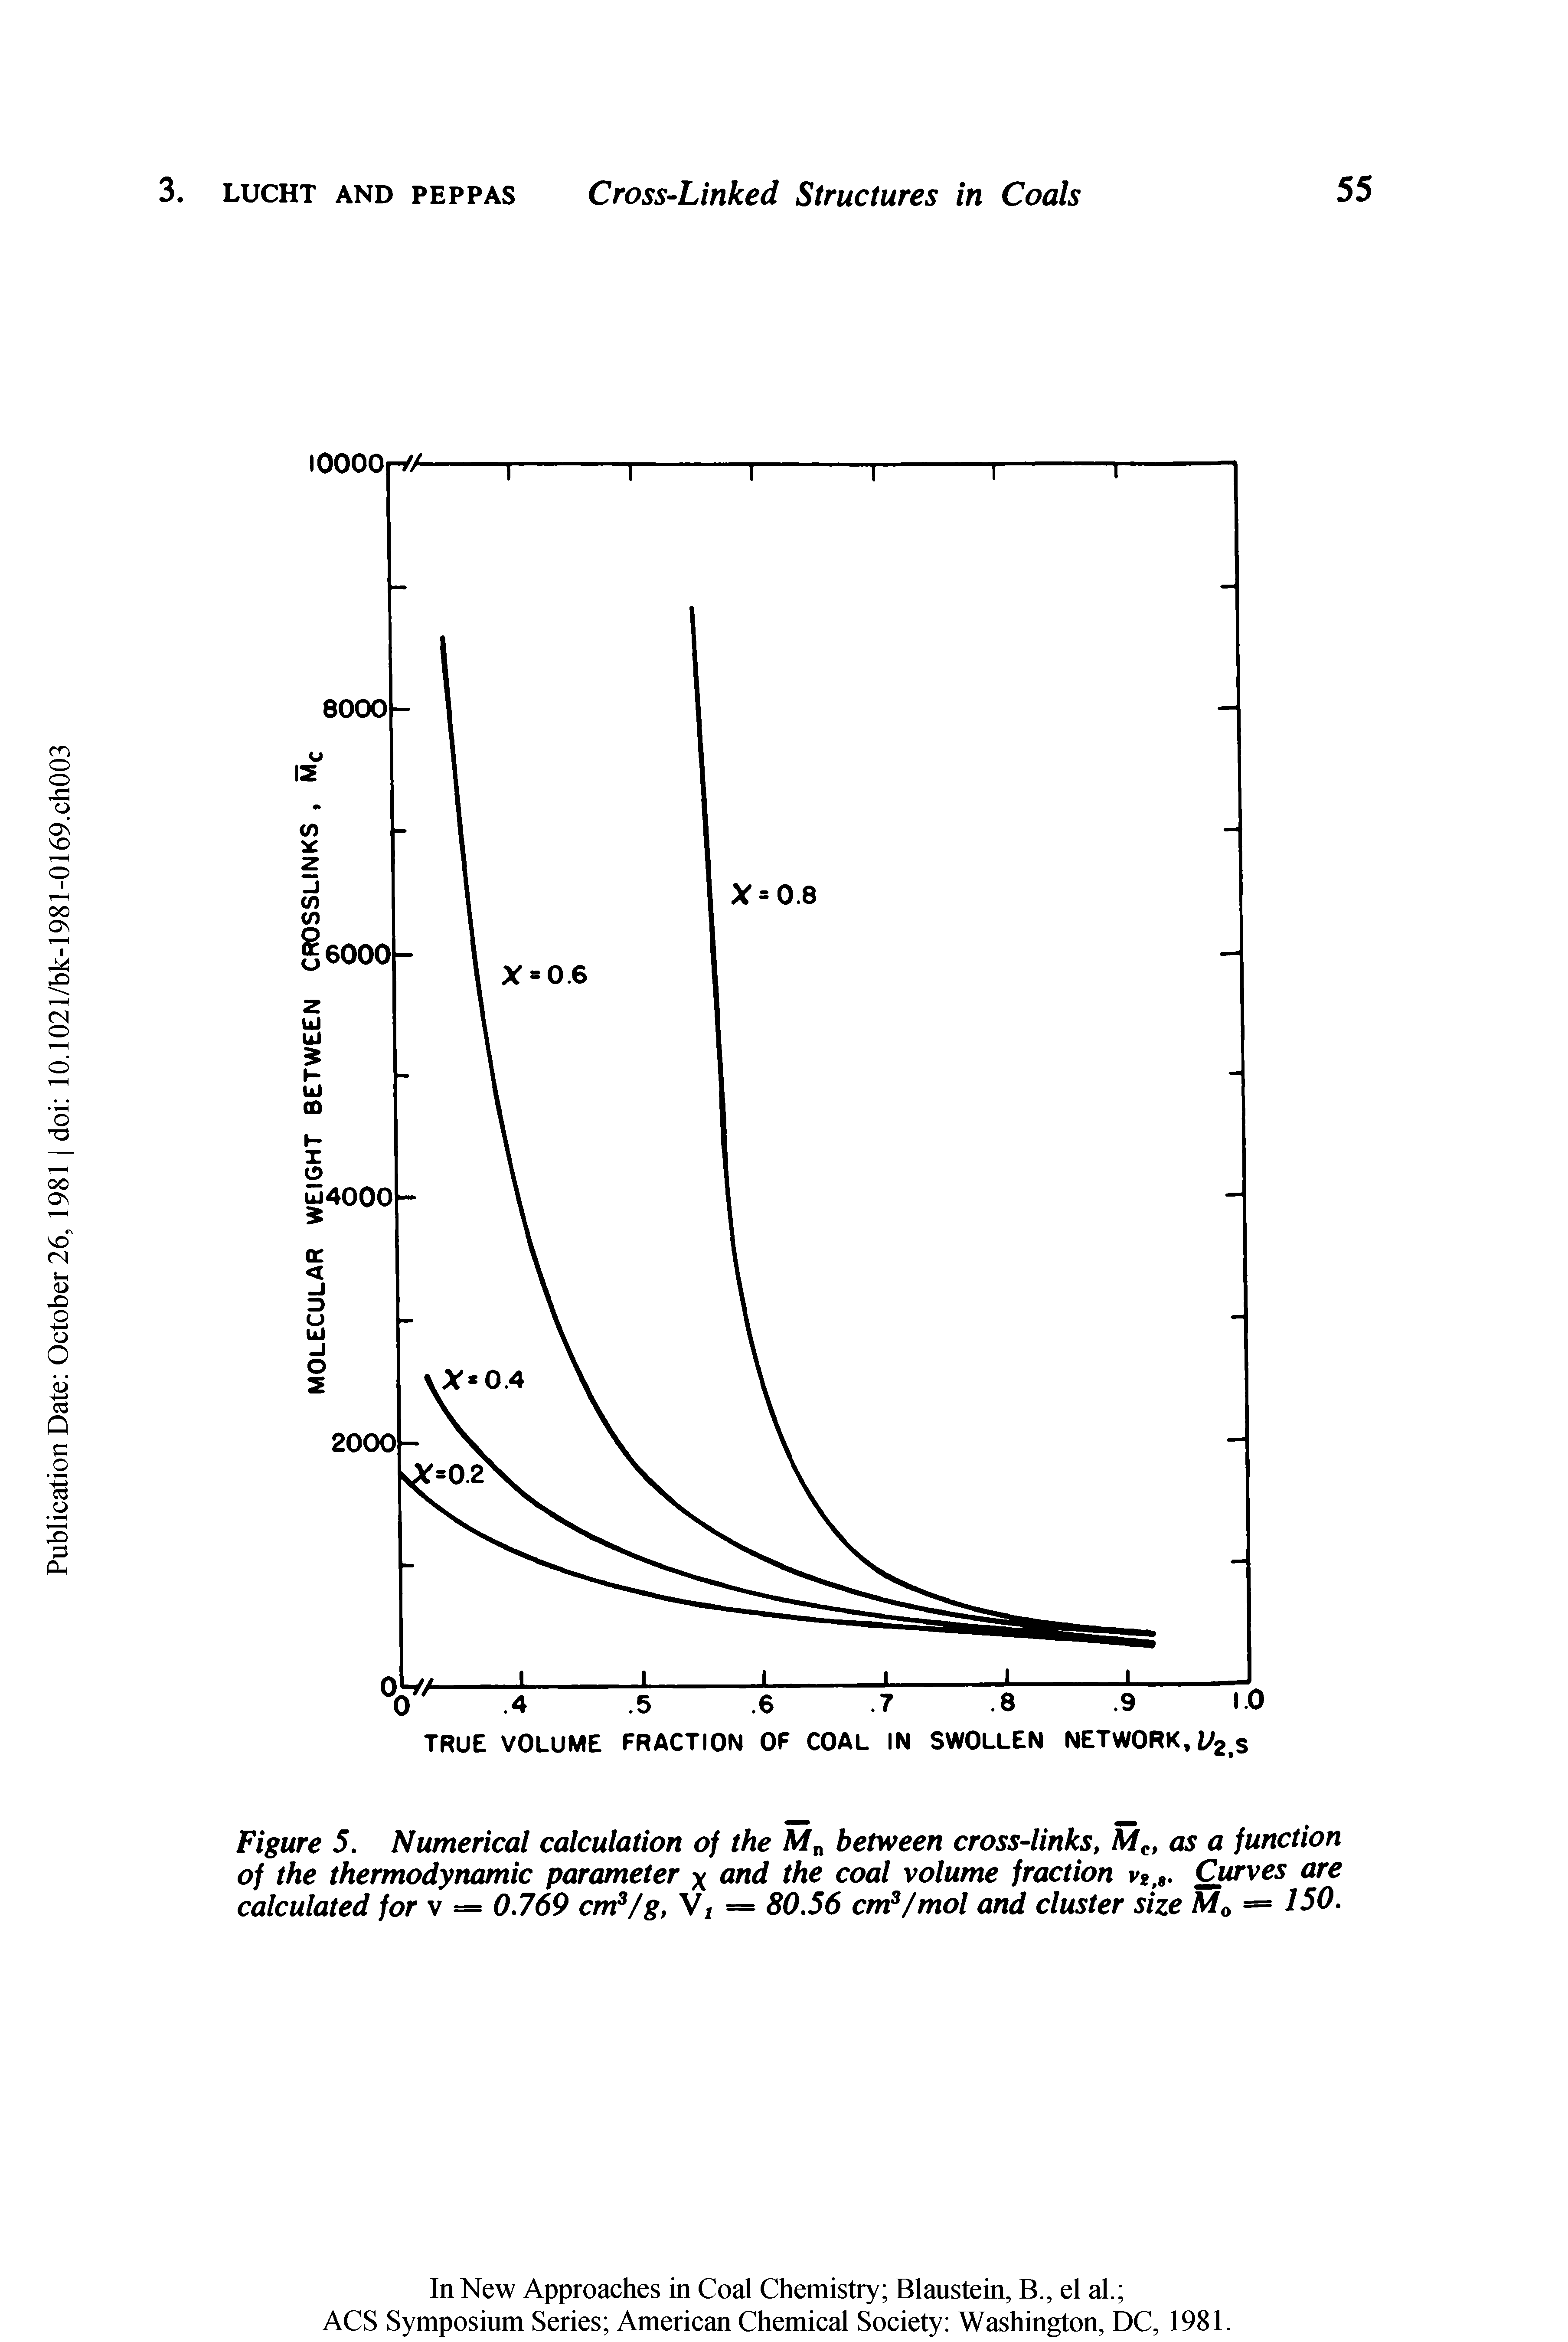 Figure 5. Numerical calculation of the Mn between cross-links, Afc, os a function of the thermodynamic parameter x and the coal volume fraction v2,8. Curves are calculated for v = 0.769 cm3/g, V, = 80.56 cm3/mol and cluster size M0 = 150.